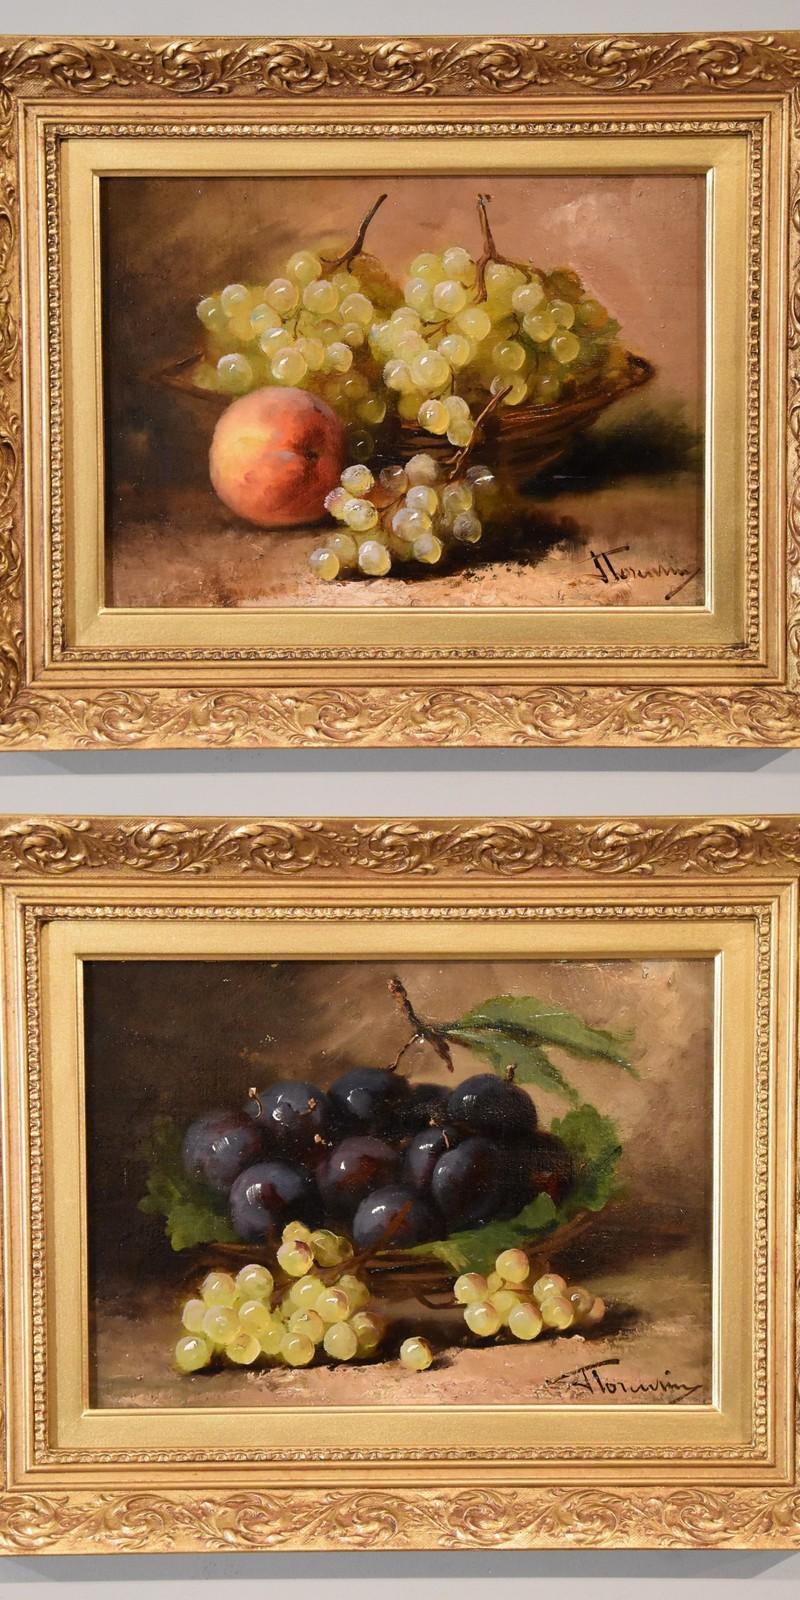 Oil Painting Pair by J Tourvin "White Grapes and Plums" c1900  A french Painter of atmospheric still-life, working around the turn of the century. Both oil on canvas. Signed.

Dimensions unframed  9 x 12
Dimensions framed   14 x 17.5

All of the